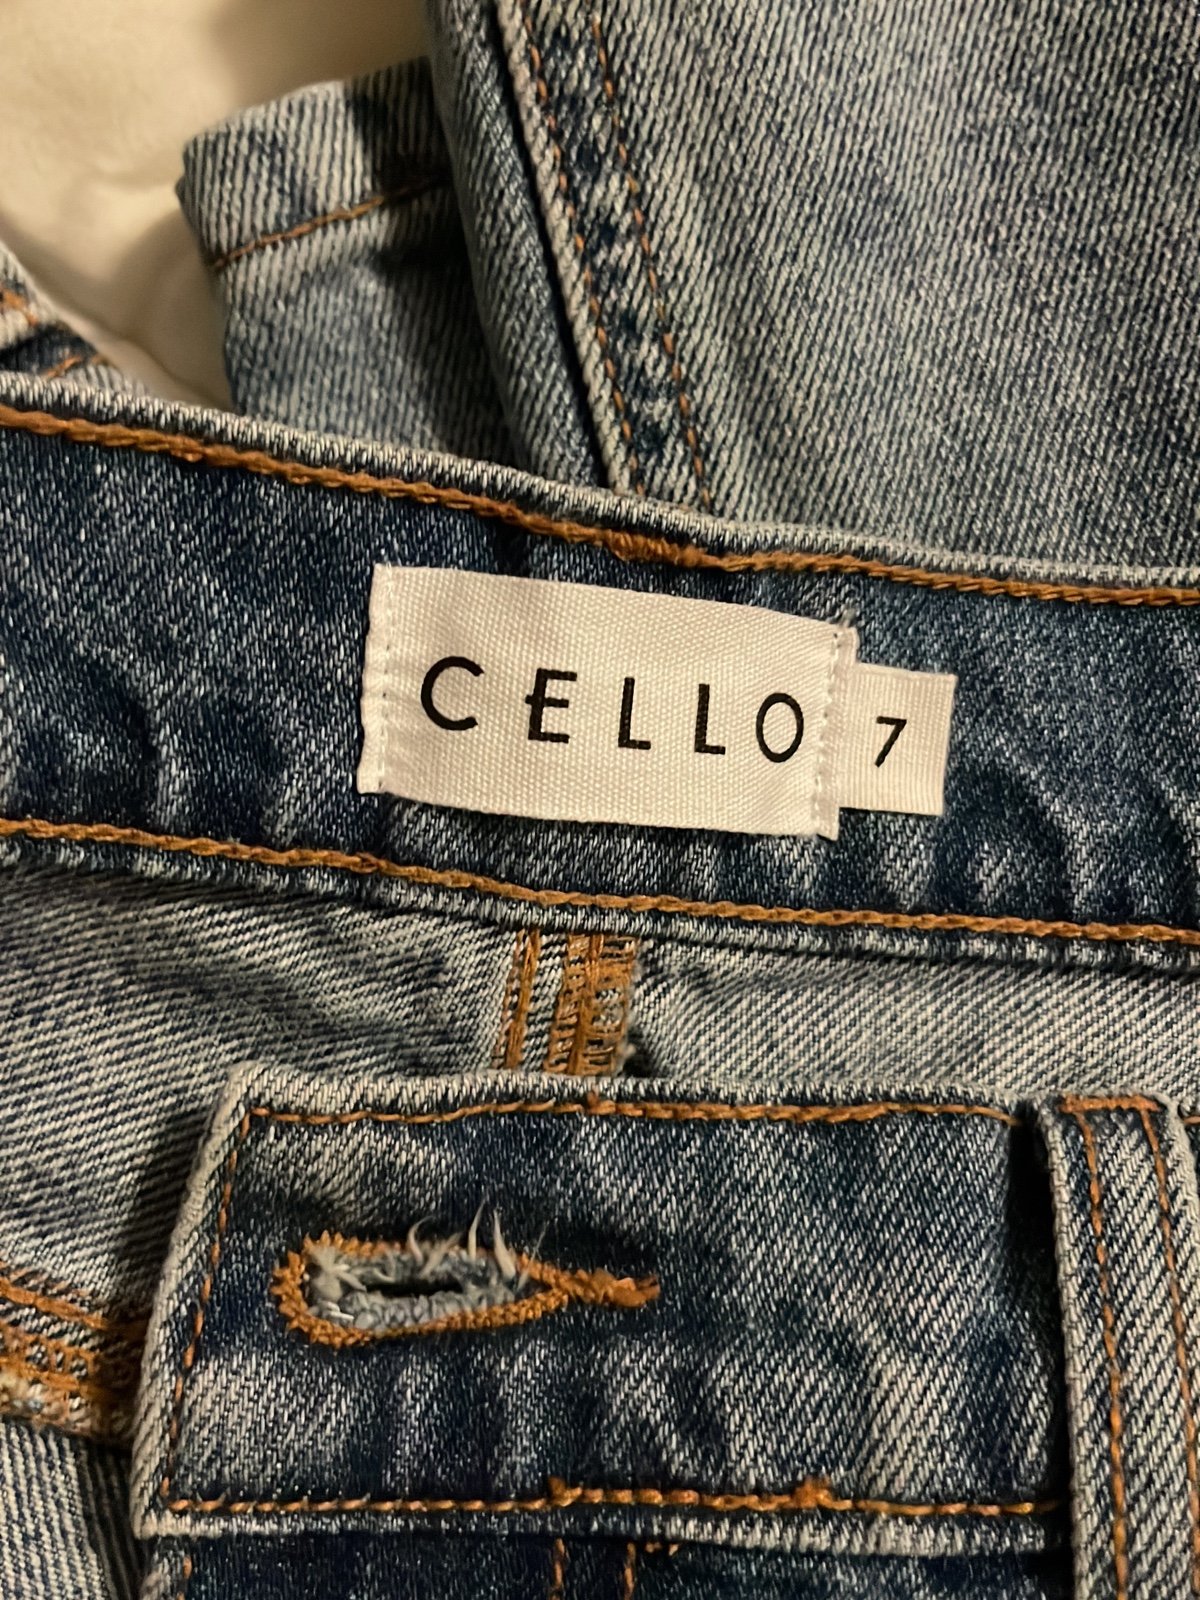 Promotions  cello jeans PPvq6R3I6 New Style